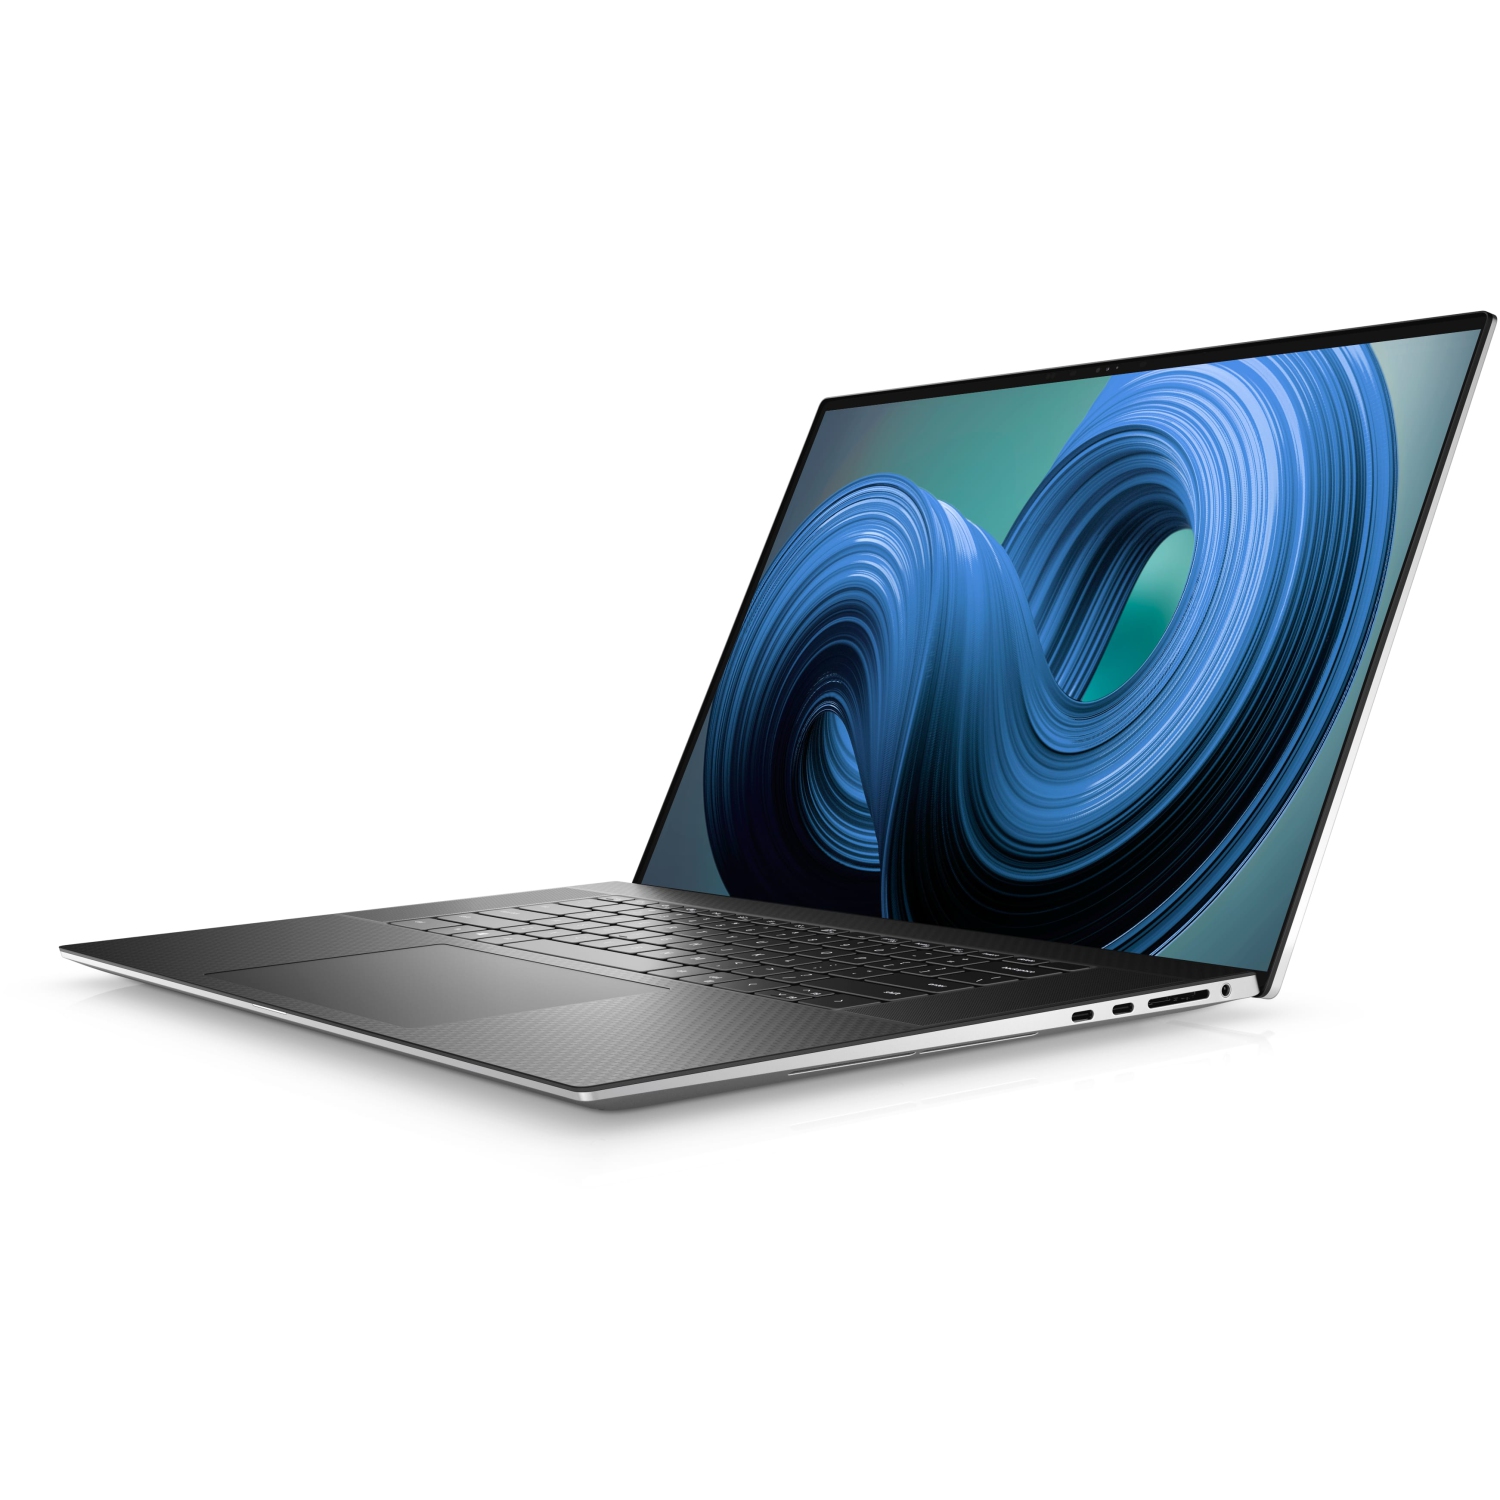 Refurbished (Excellent) – Dell XPS 9720 Laptop (2022) | 17" FHD+ | Core i7 - 2TB SSD - 16GB RAM - RTX 3050 | 14 Cores @ 4.7 GHz - 12th Gen CPU